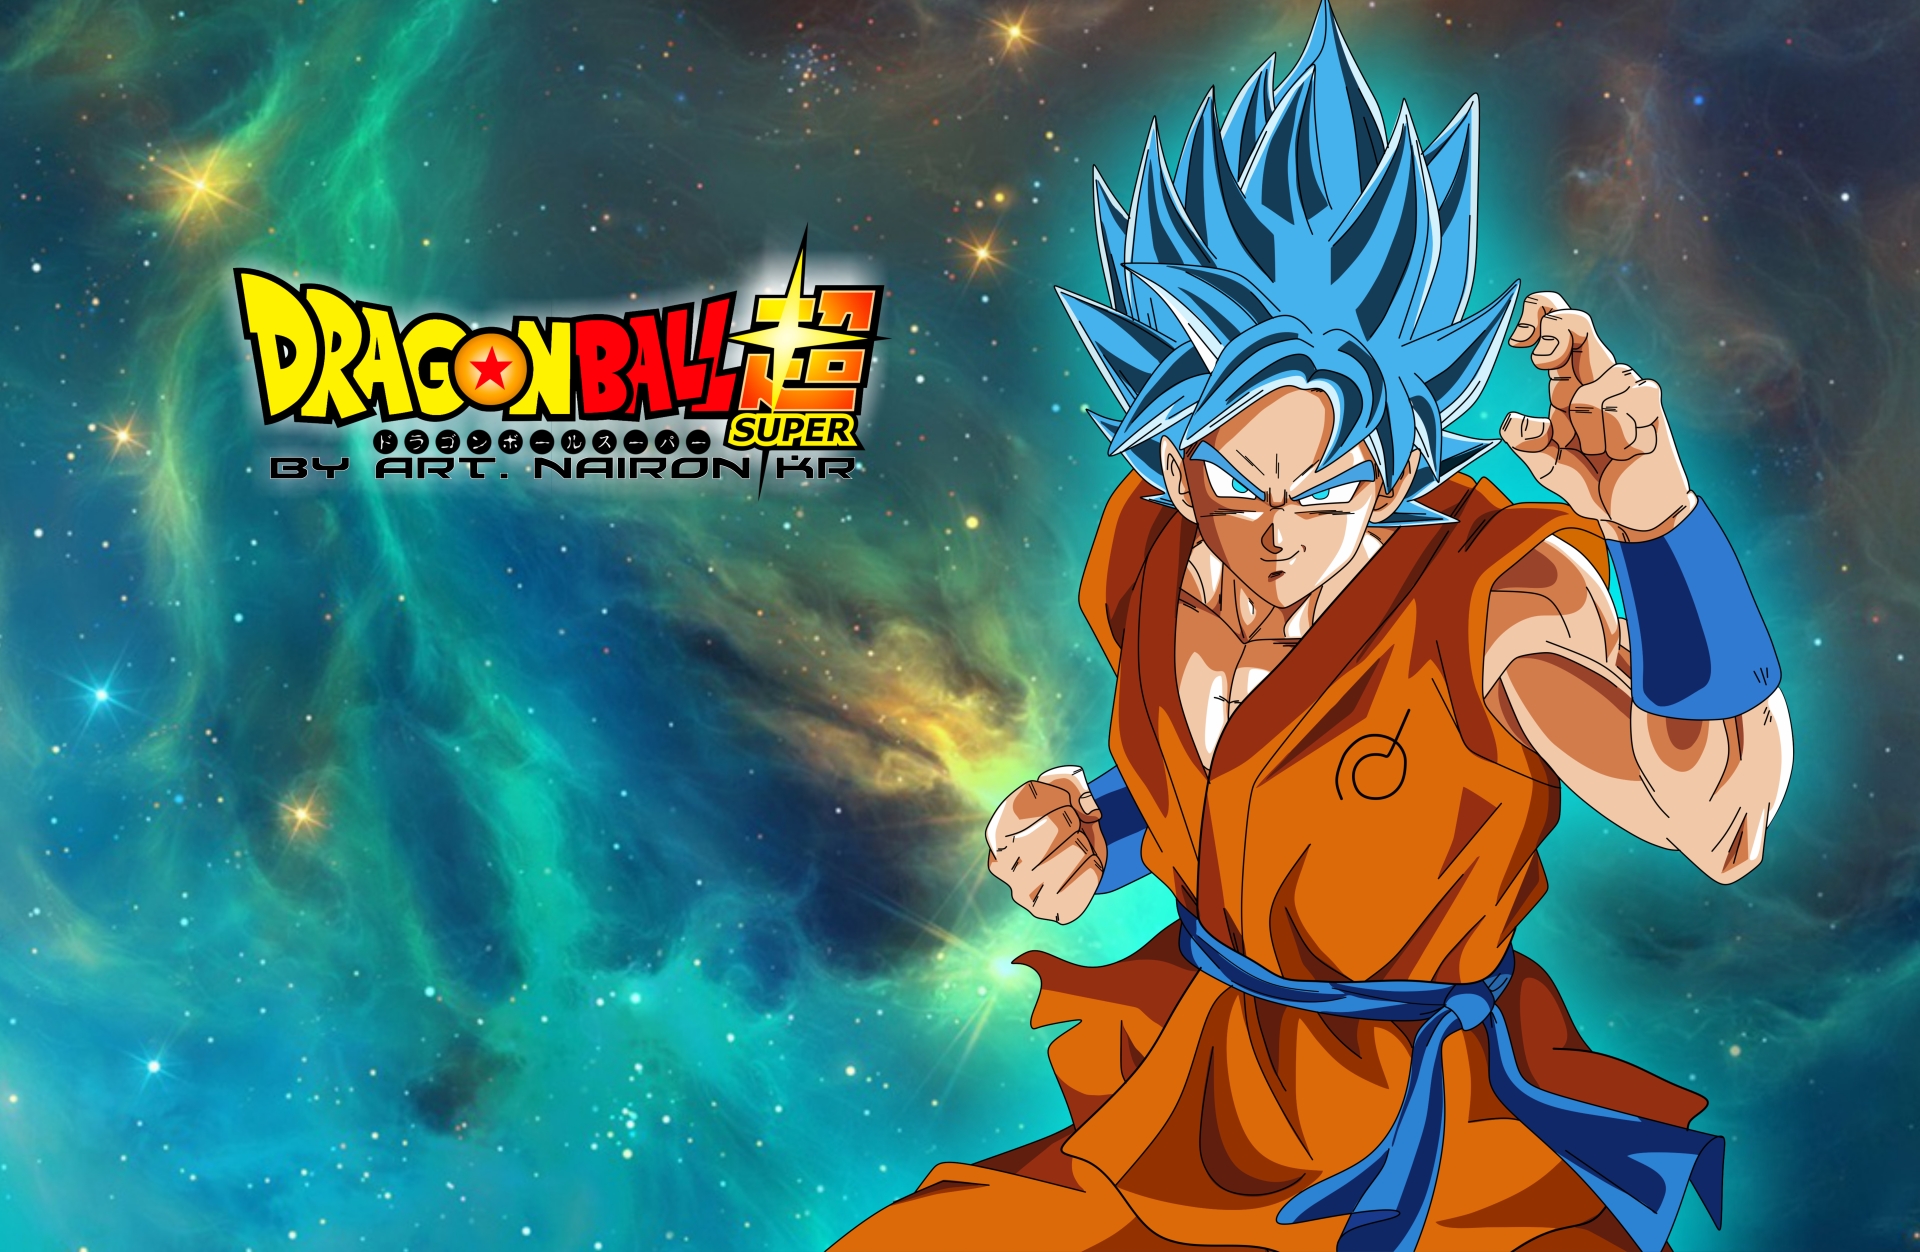 10 Most Popular Dragon Ball Super Hd Wallpaper For Pc FULL HD 1920×1080 For PC Background